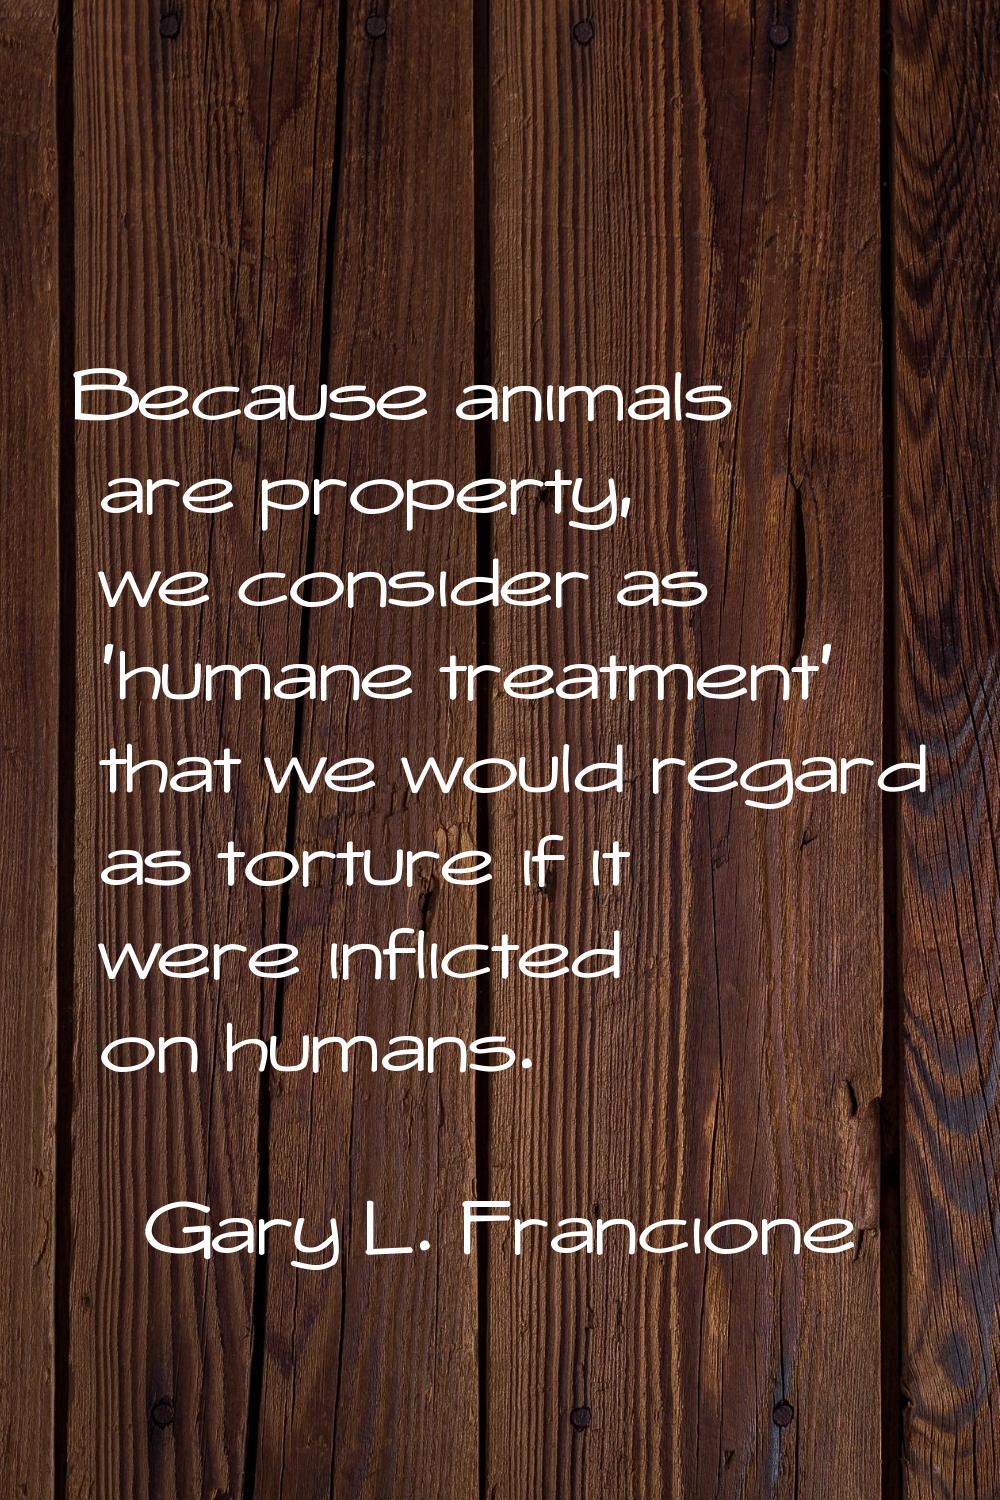 Because animals are property, we consider as 'humane treatment' that we would regard as torture if 